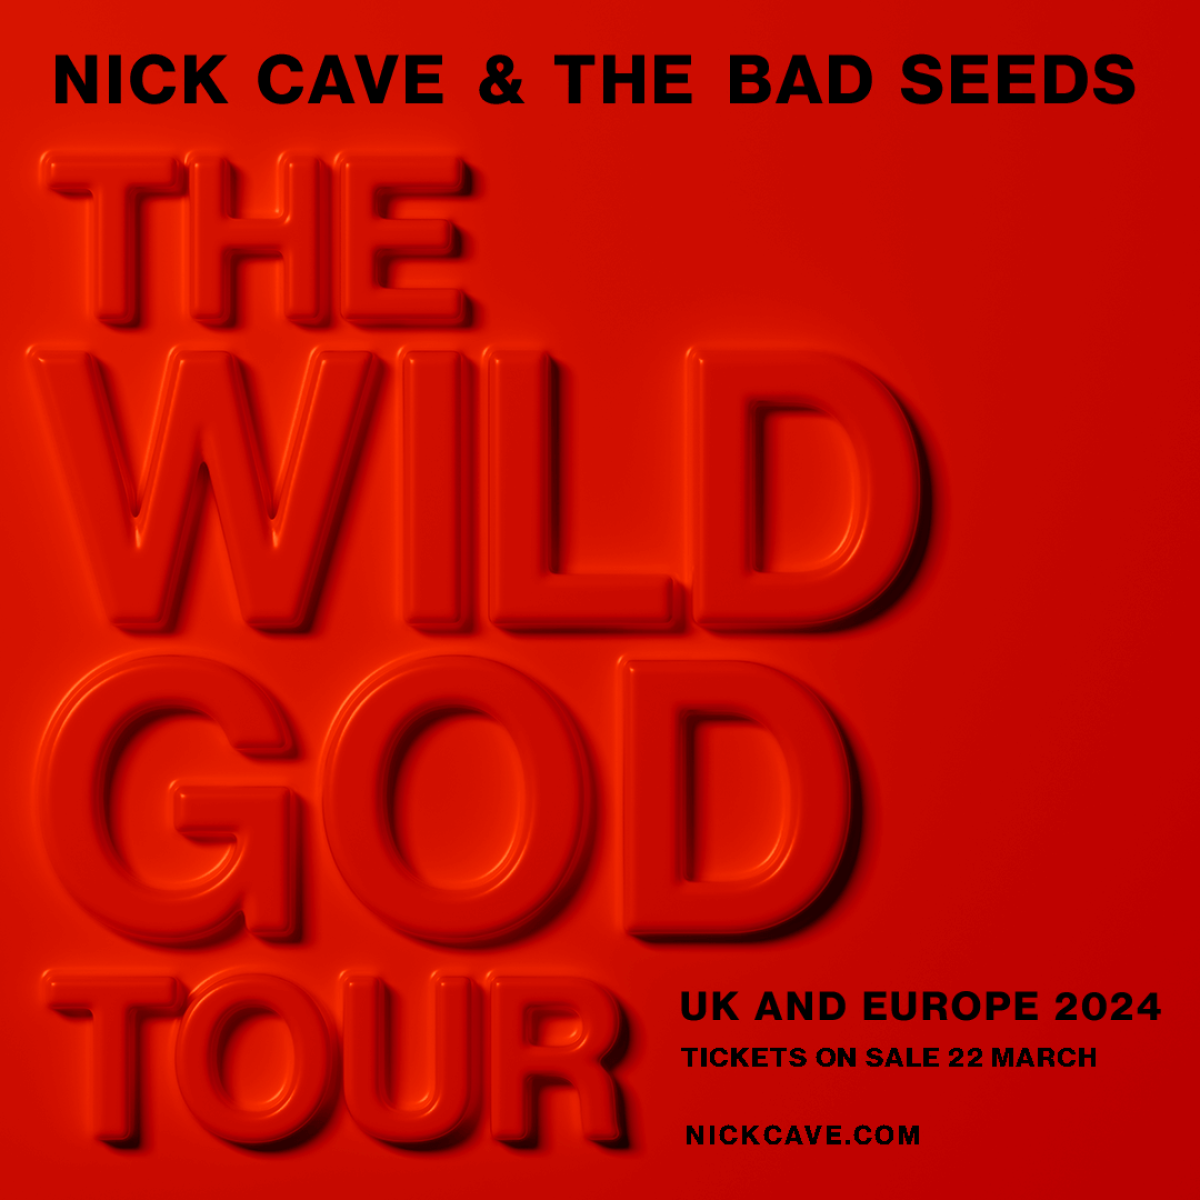 Nick Cave and the Bad Seeds - The Wild God Tour en Olympiahalle Munich Tickets